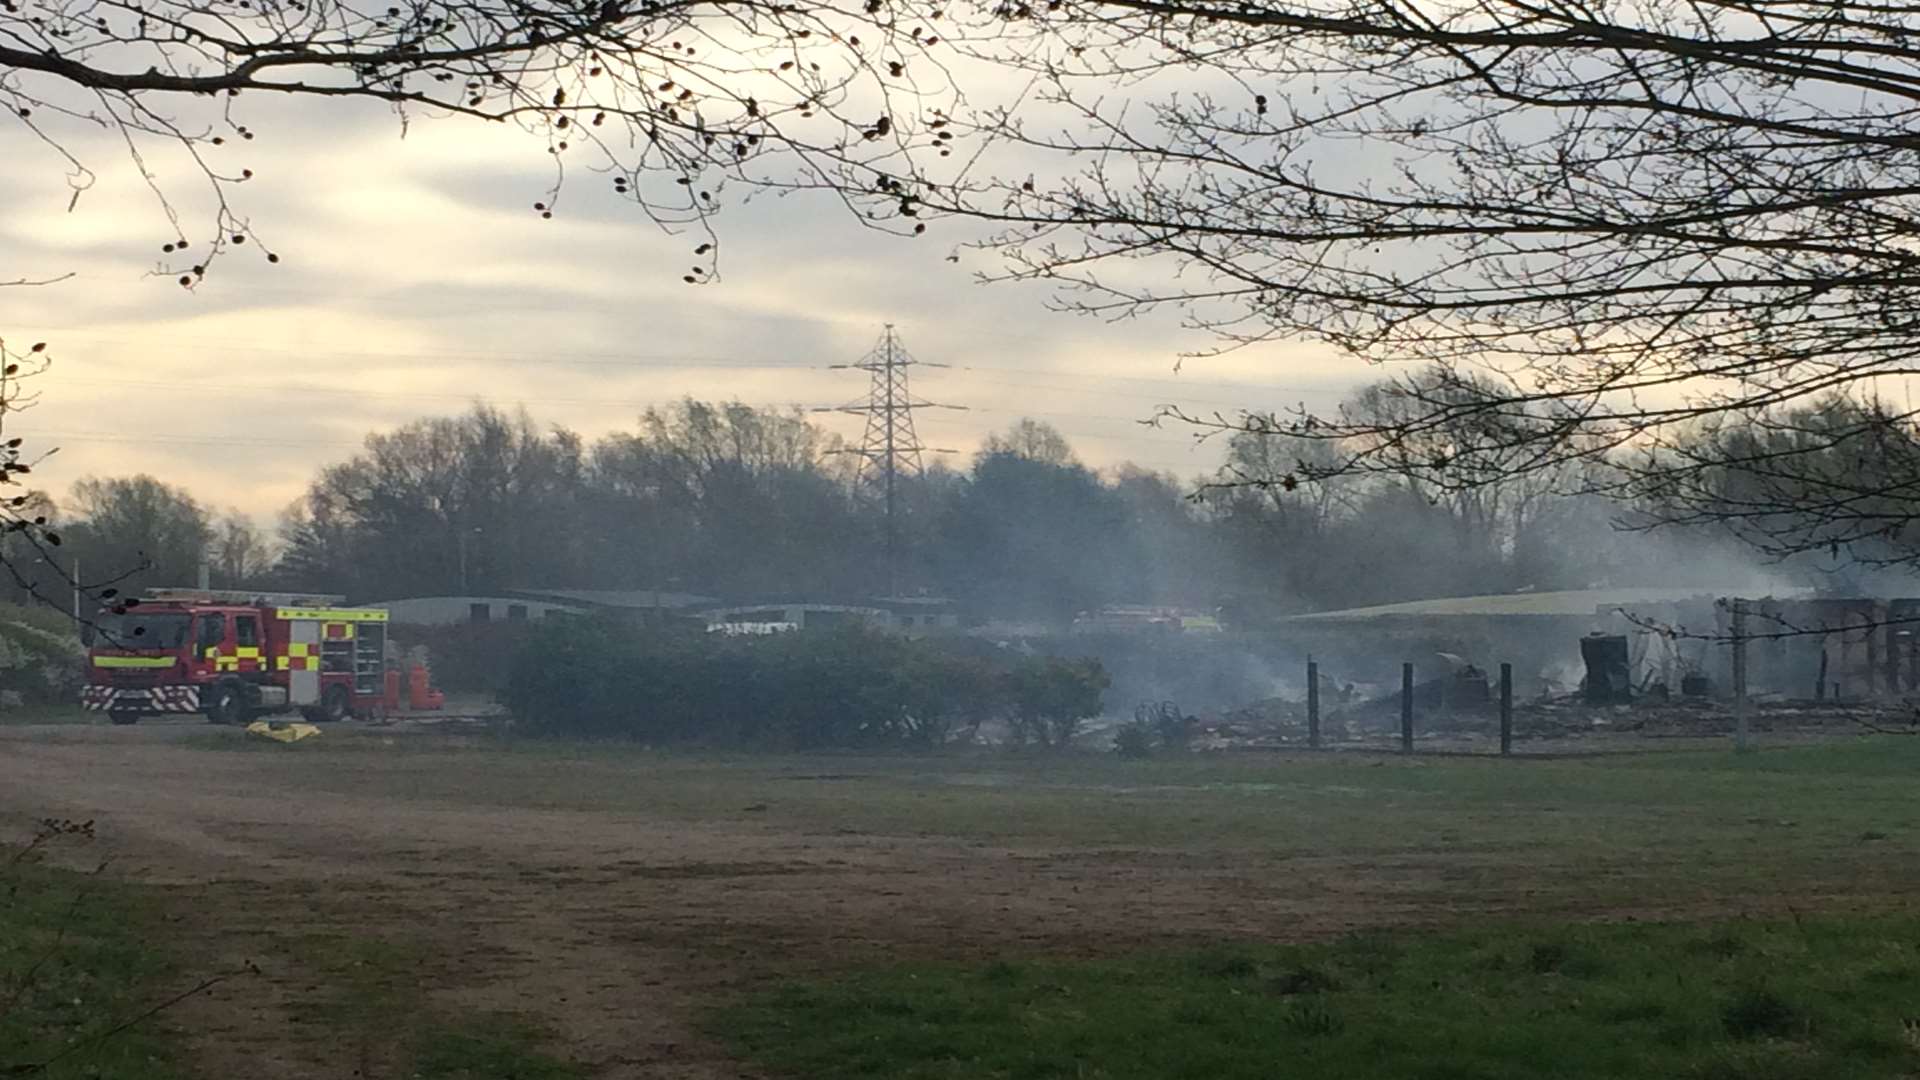 The clubhouse has been burnt to the ground